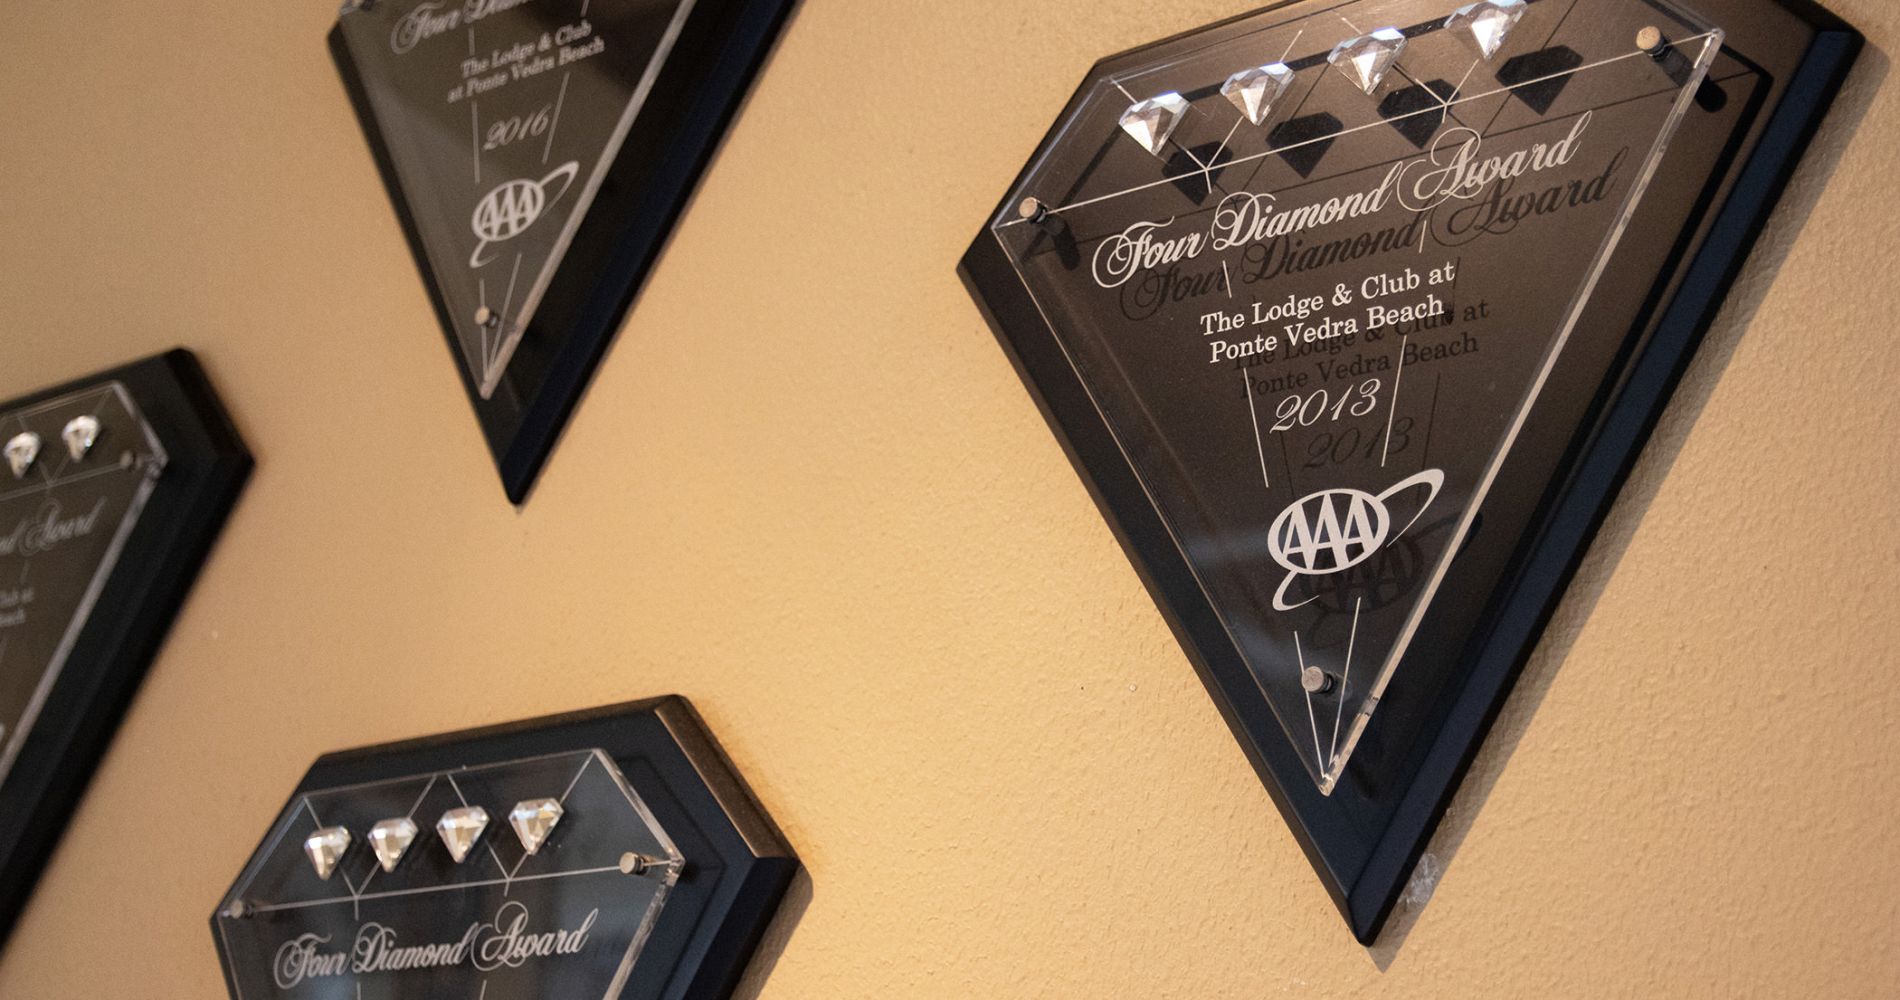 Four AAA Four Diamond awards hanging on a wall